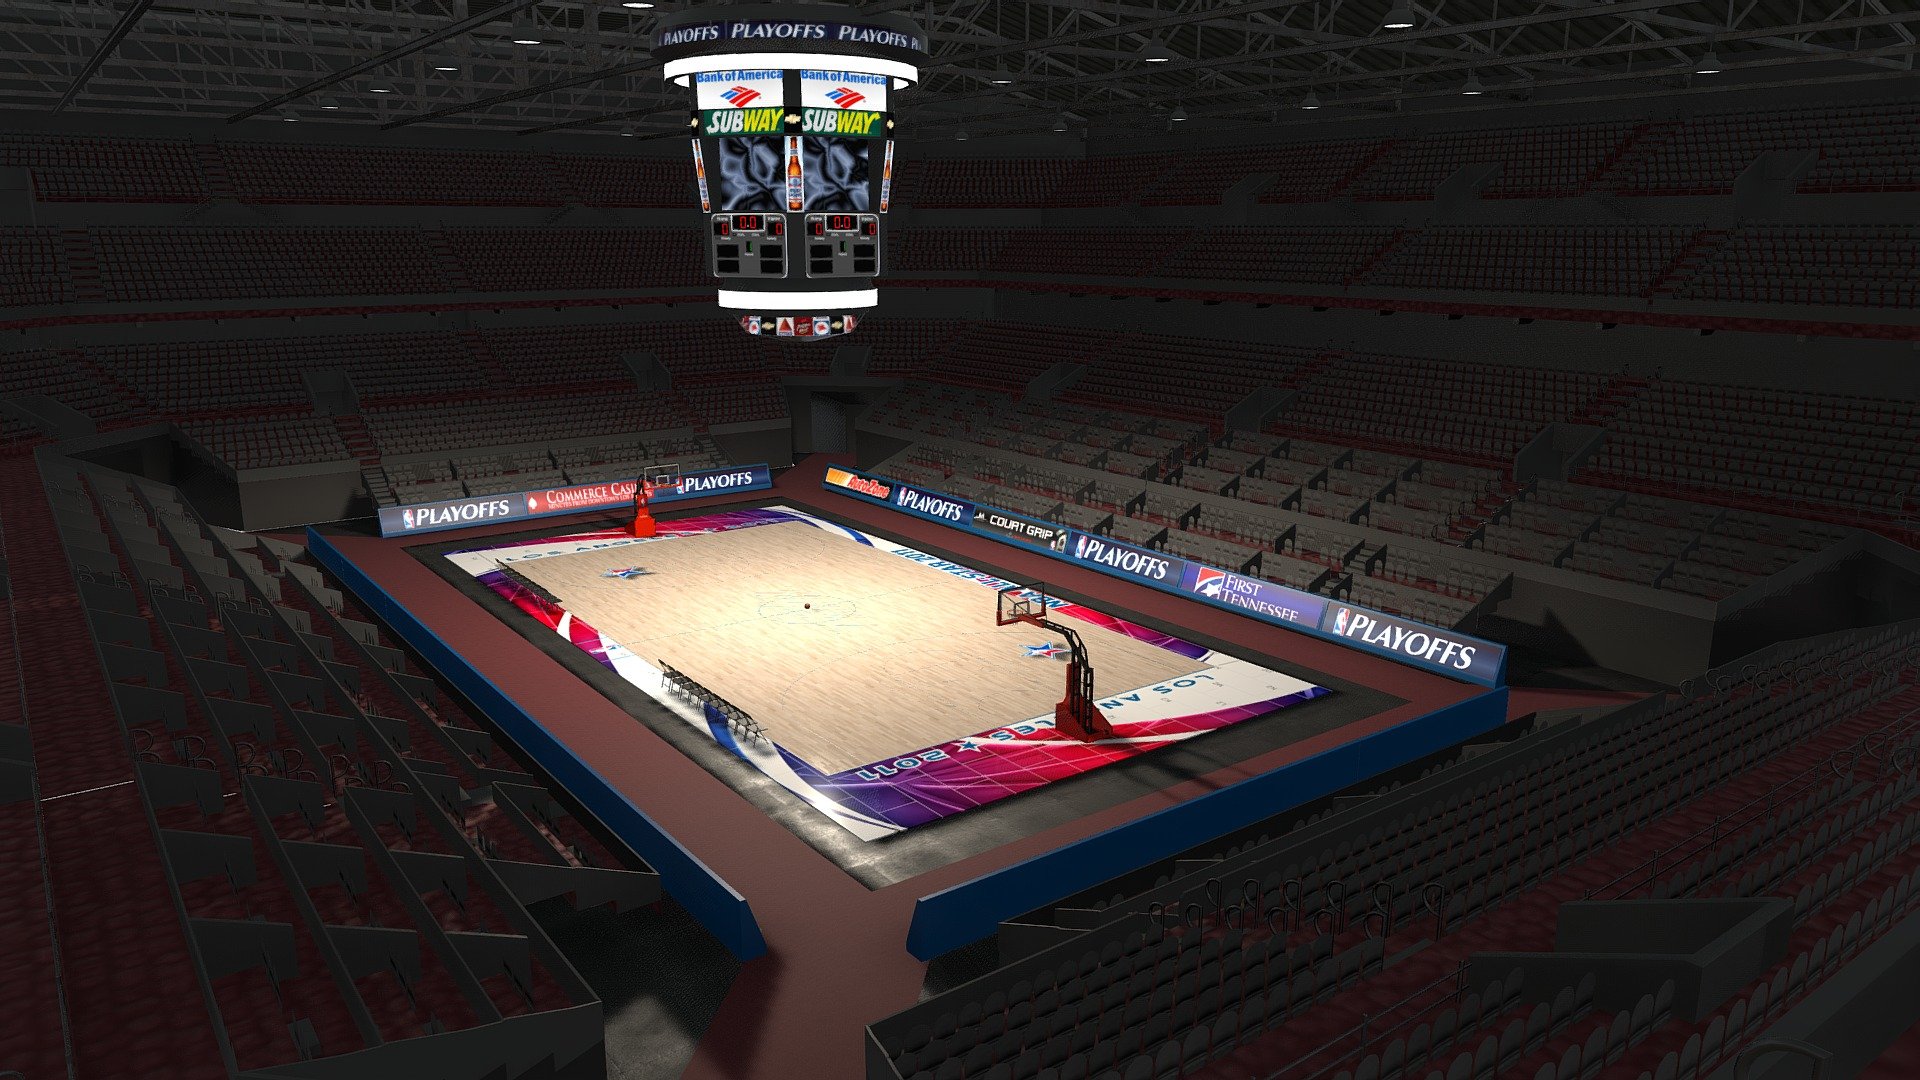 2011 NBA All star court version as requested by a customer

This is an Editorial Licence due to it using various copyrighted logos on the lights, banners and court. These can easily be changed to anything you require using the provided textures though 3d model